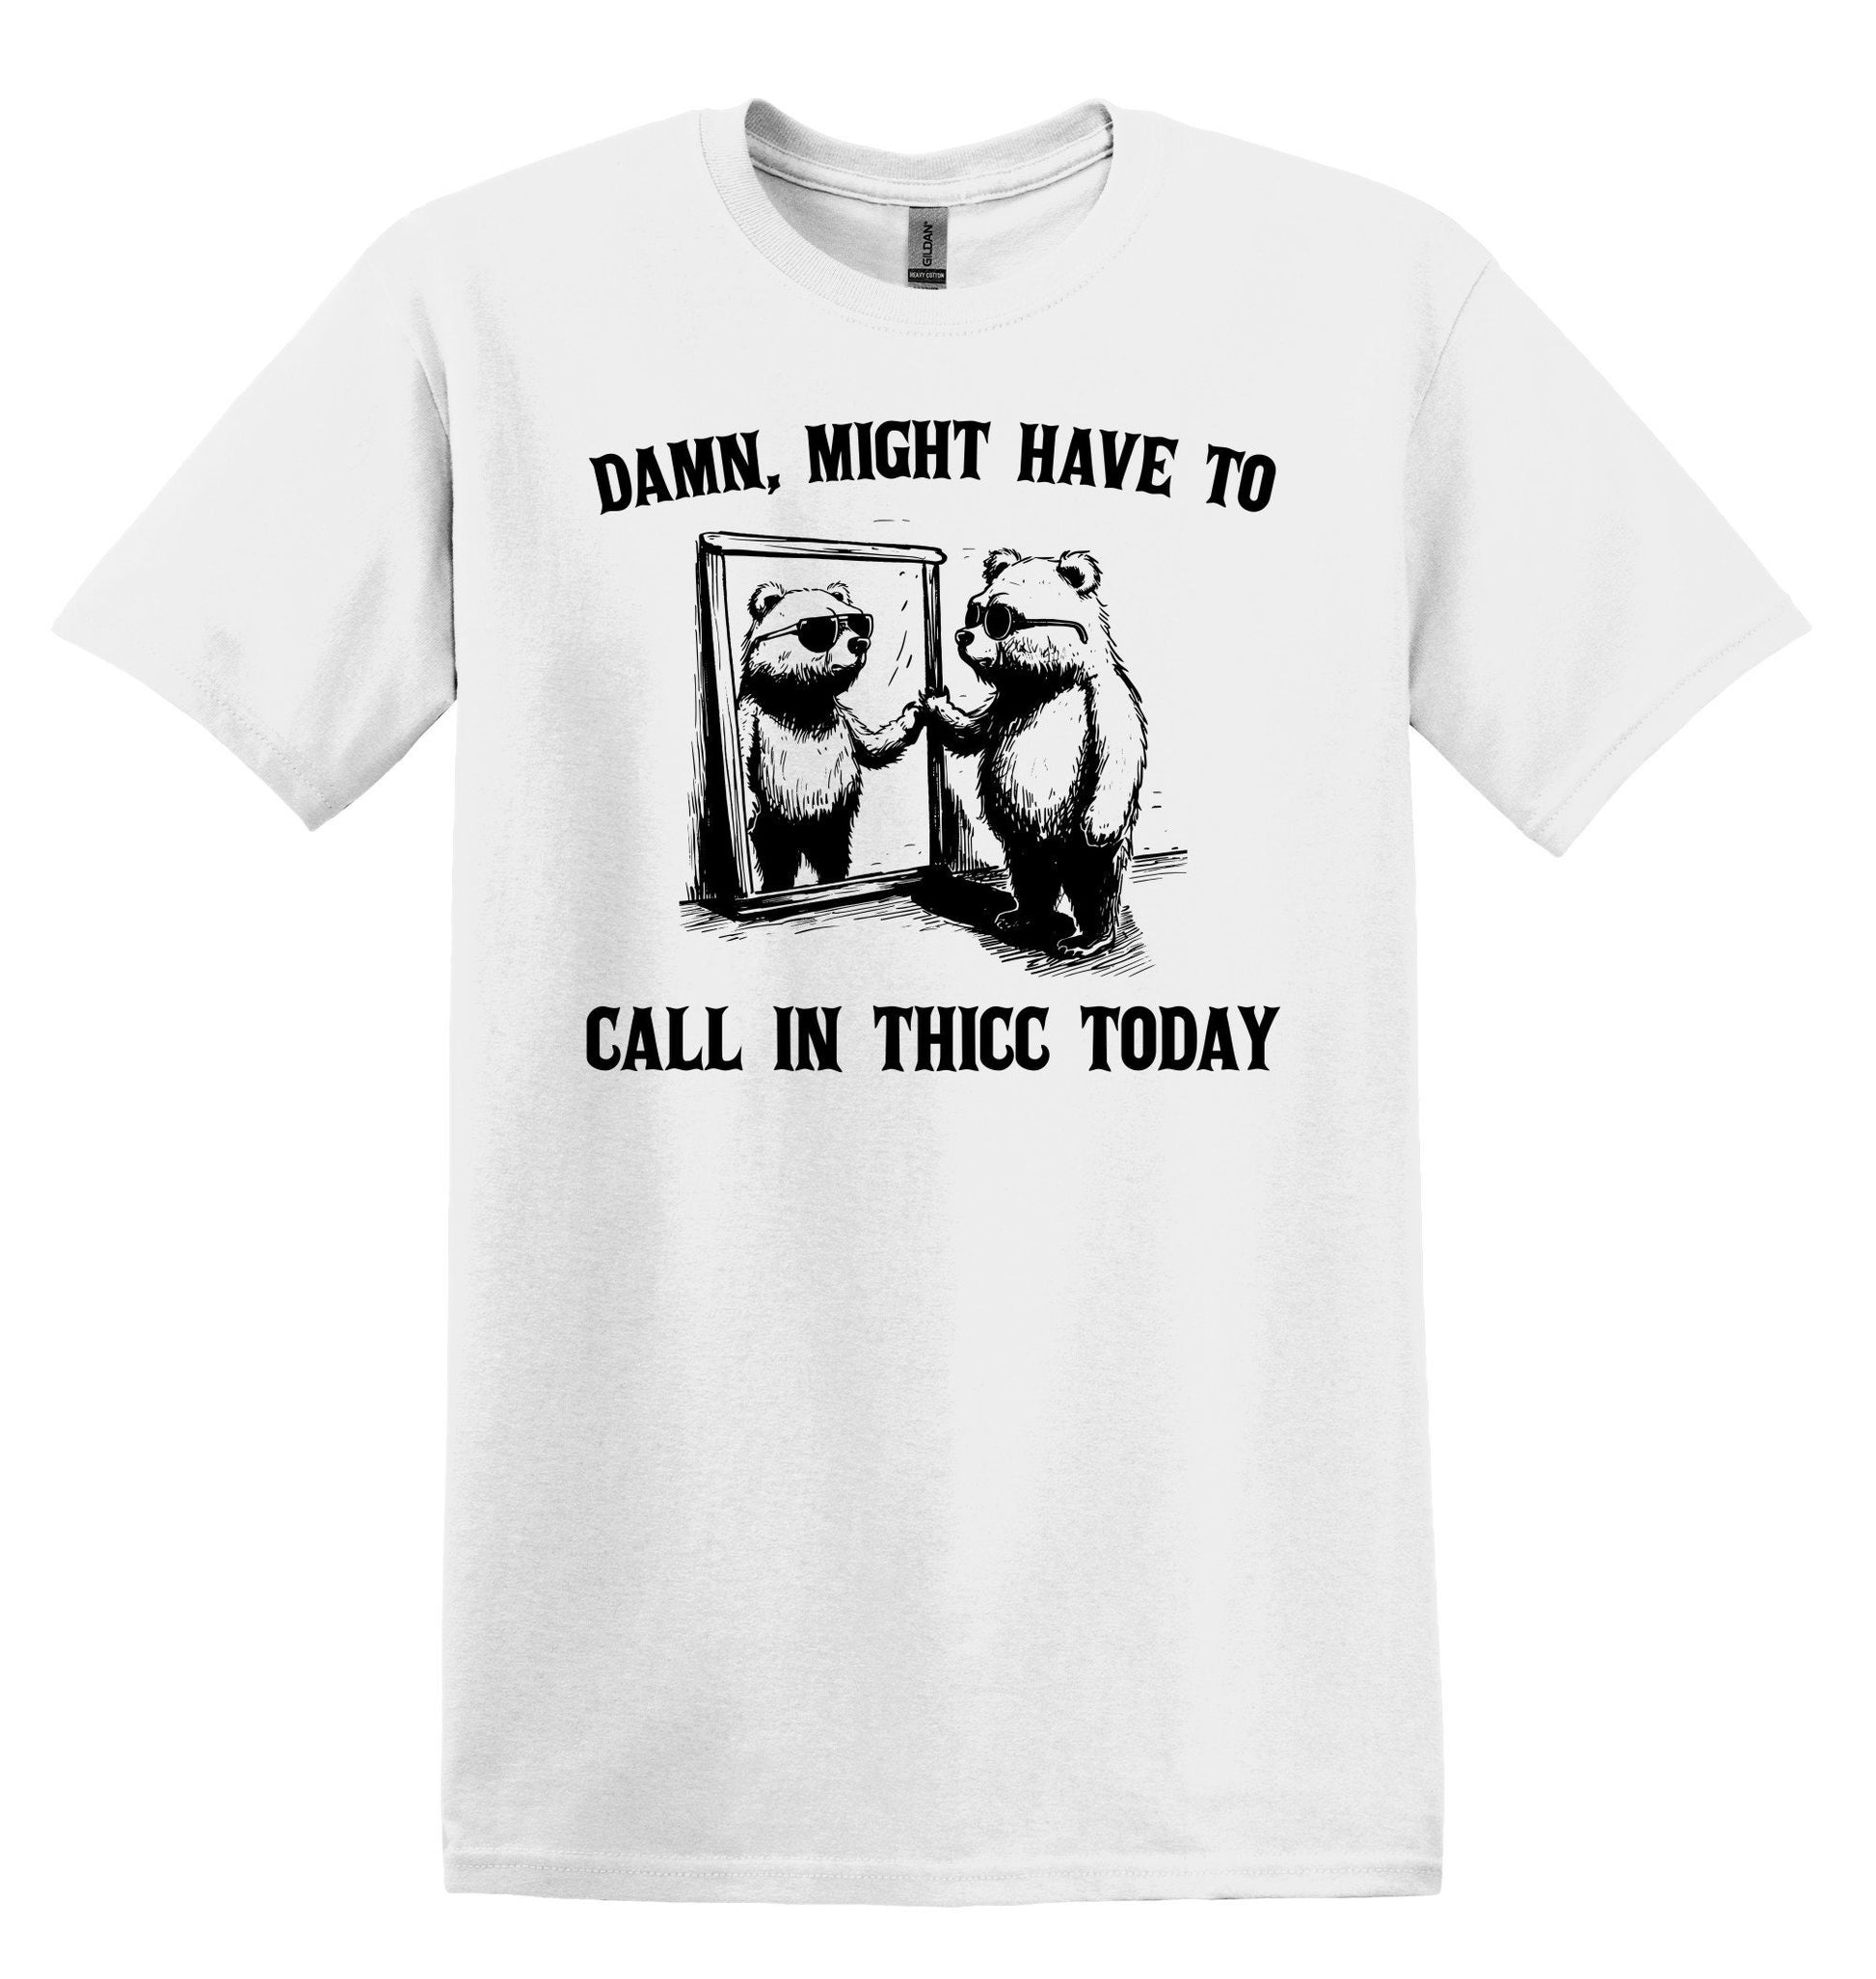 Damn, Might Have to Call in Thicc Today Shirt Graphic Shirt Funny Shirts Vintage Funny TShirts Minimalist Shirt Unisex Shirt Nostalgia Shirt